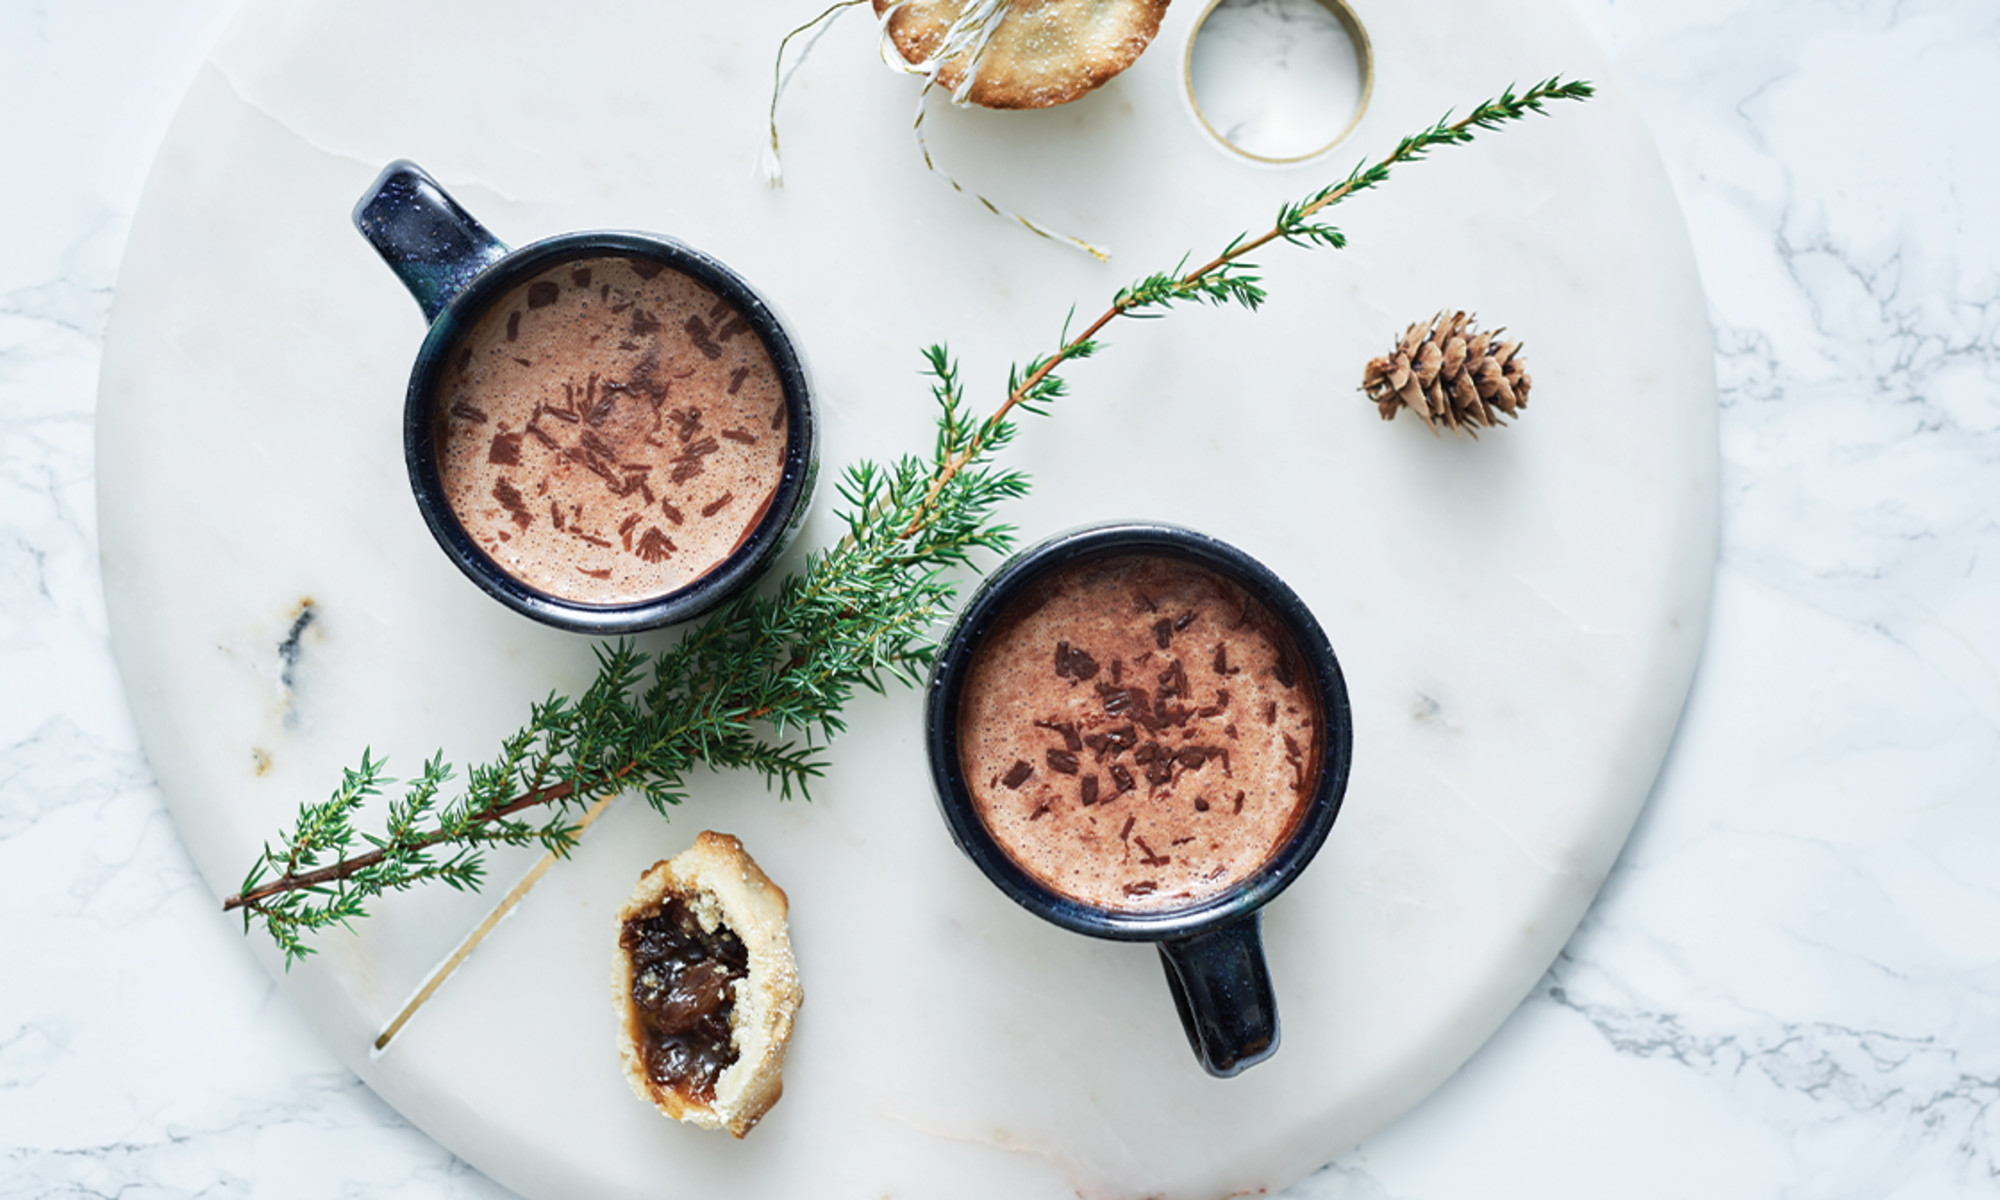 This Sugar-Free Chocolatey Drink Is Basically Adult Hot Cocoa (& It's Great For Skin)